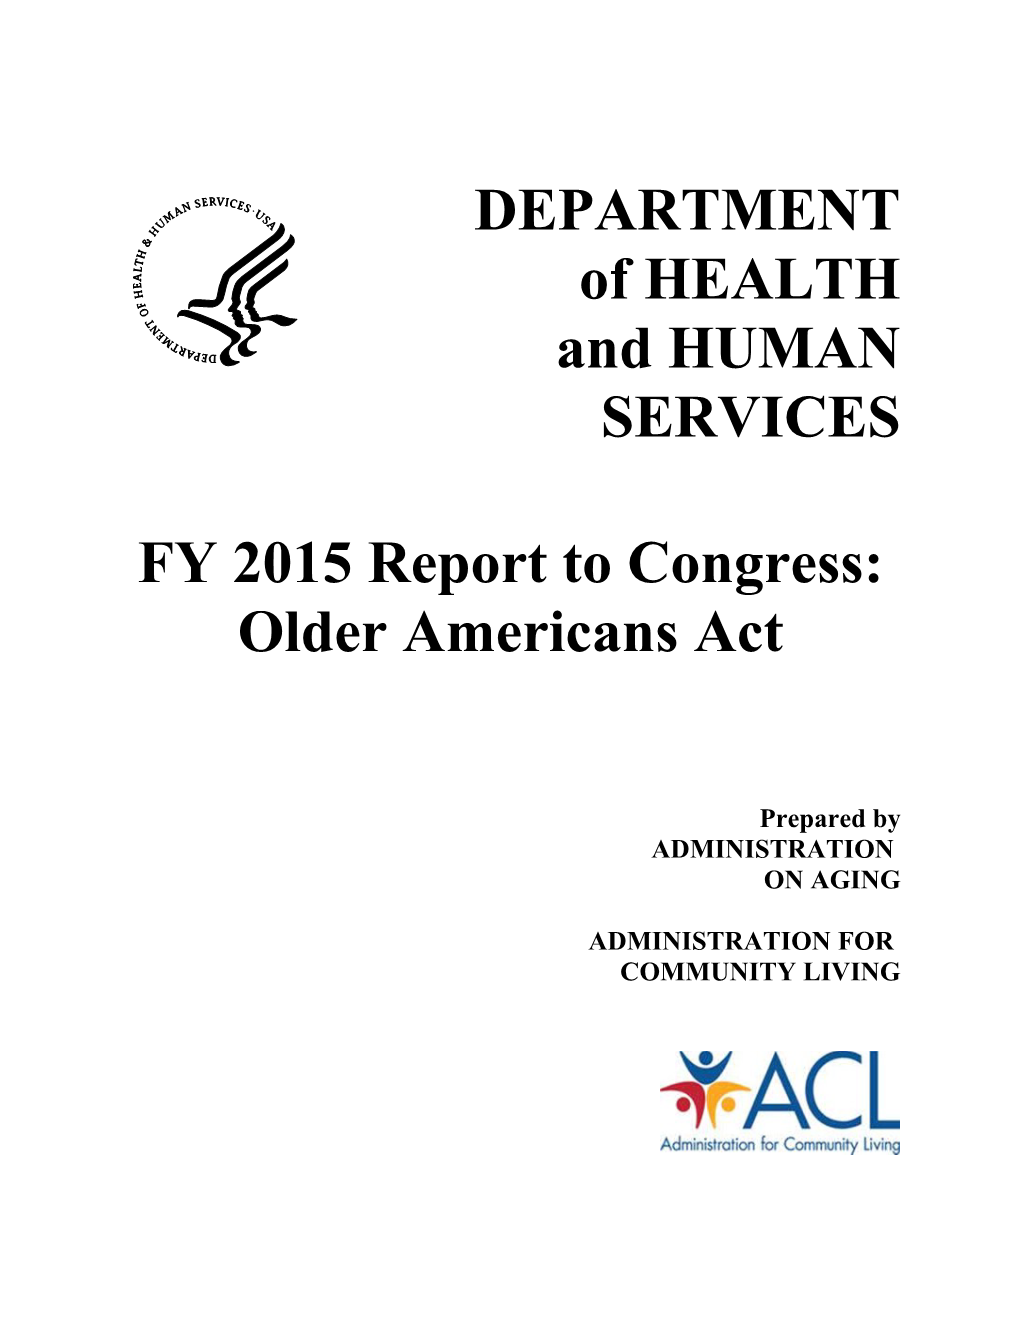 Older Americans Act